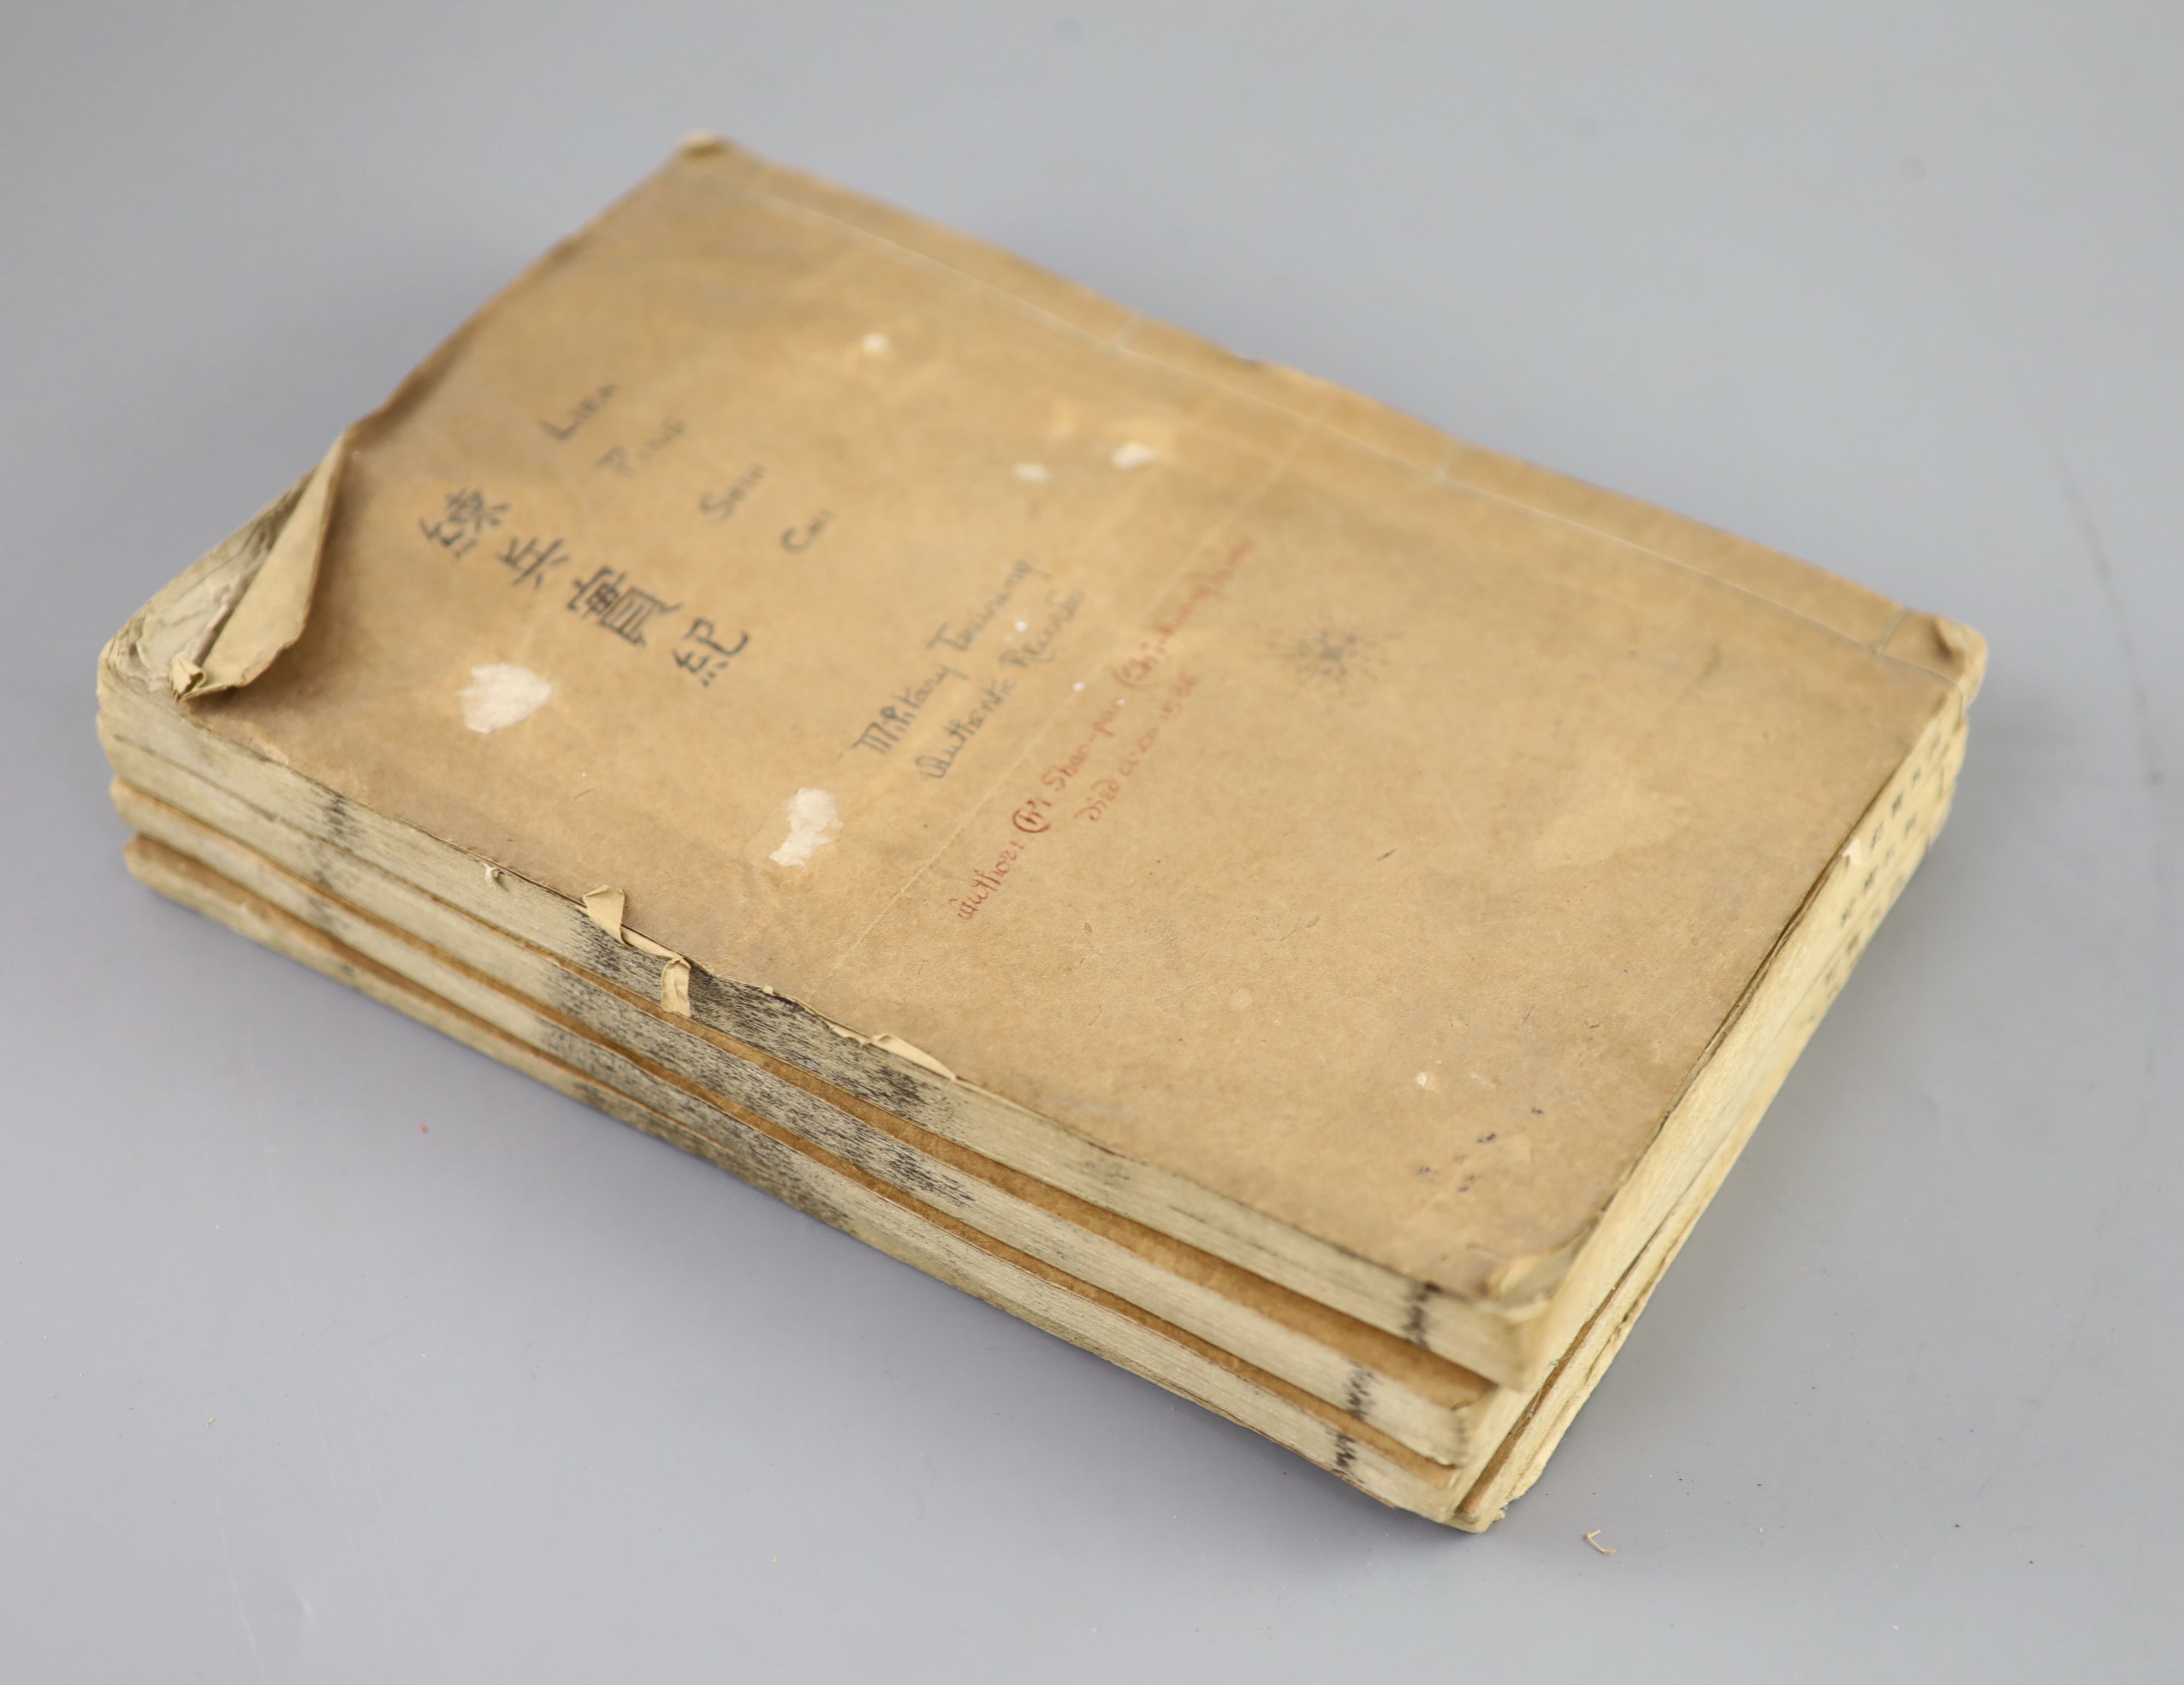 Chinese book, Jiguang Qi, Military Training: Authentic Records 'Lien ping shih chi', undated but probably Qing dynasty, Provenance - A. T. Arber-Cooke